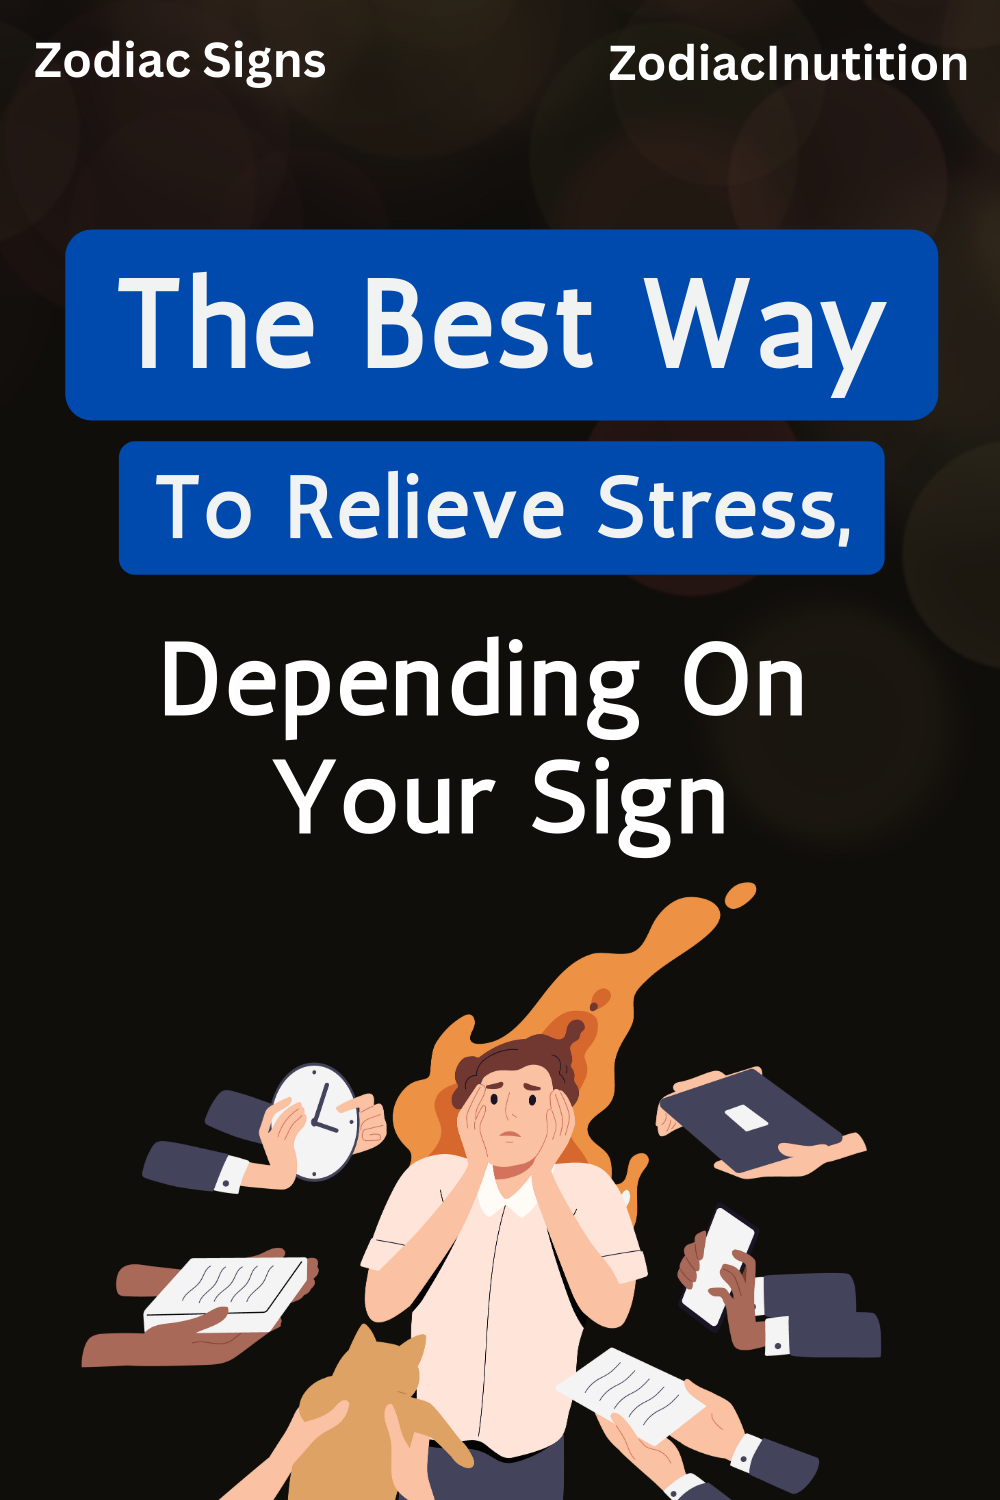 The Best Way To Relieve Stress, Depending On Your Sign